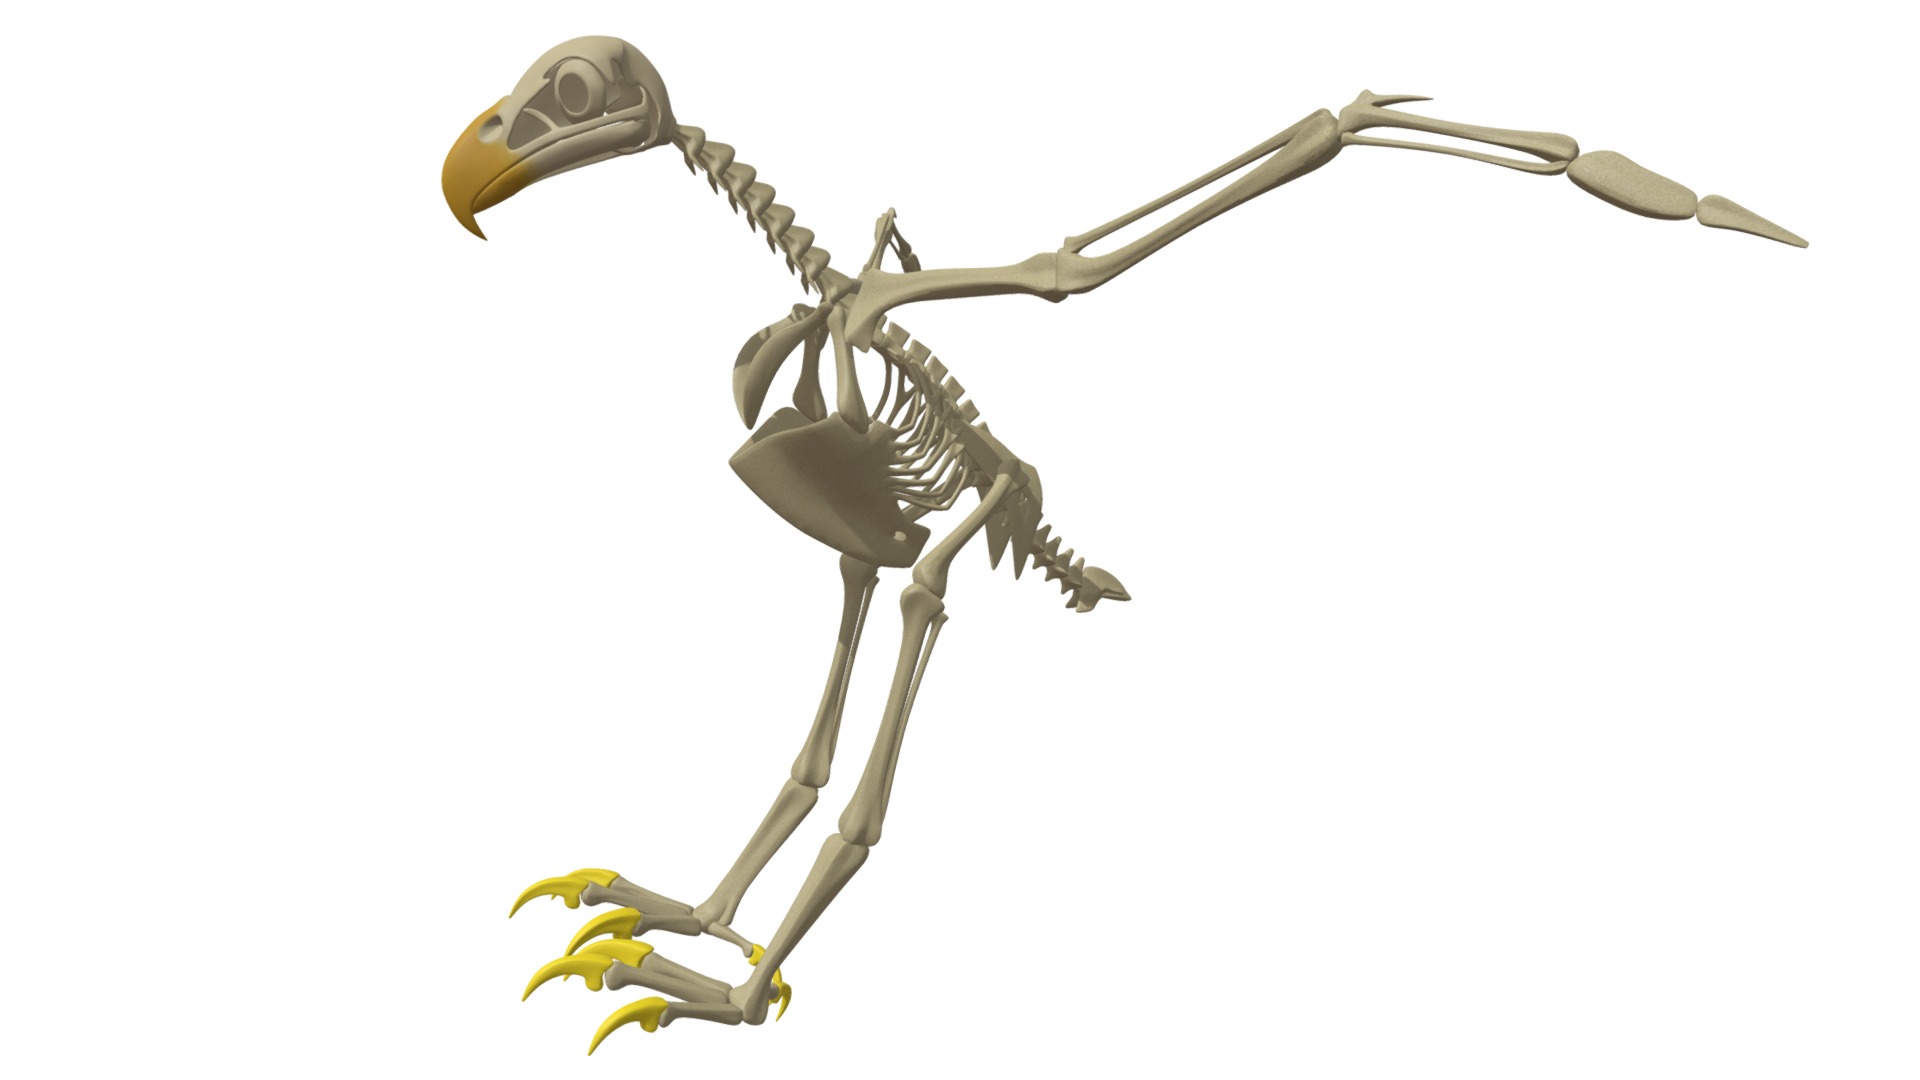 3D model Bald Eagle Skeleton - This is a 3D model of the Bald Eagle Skeleton. The 3D model is about a toy dinosaur with a long neck.